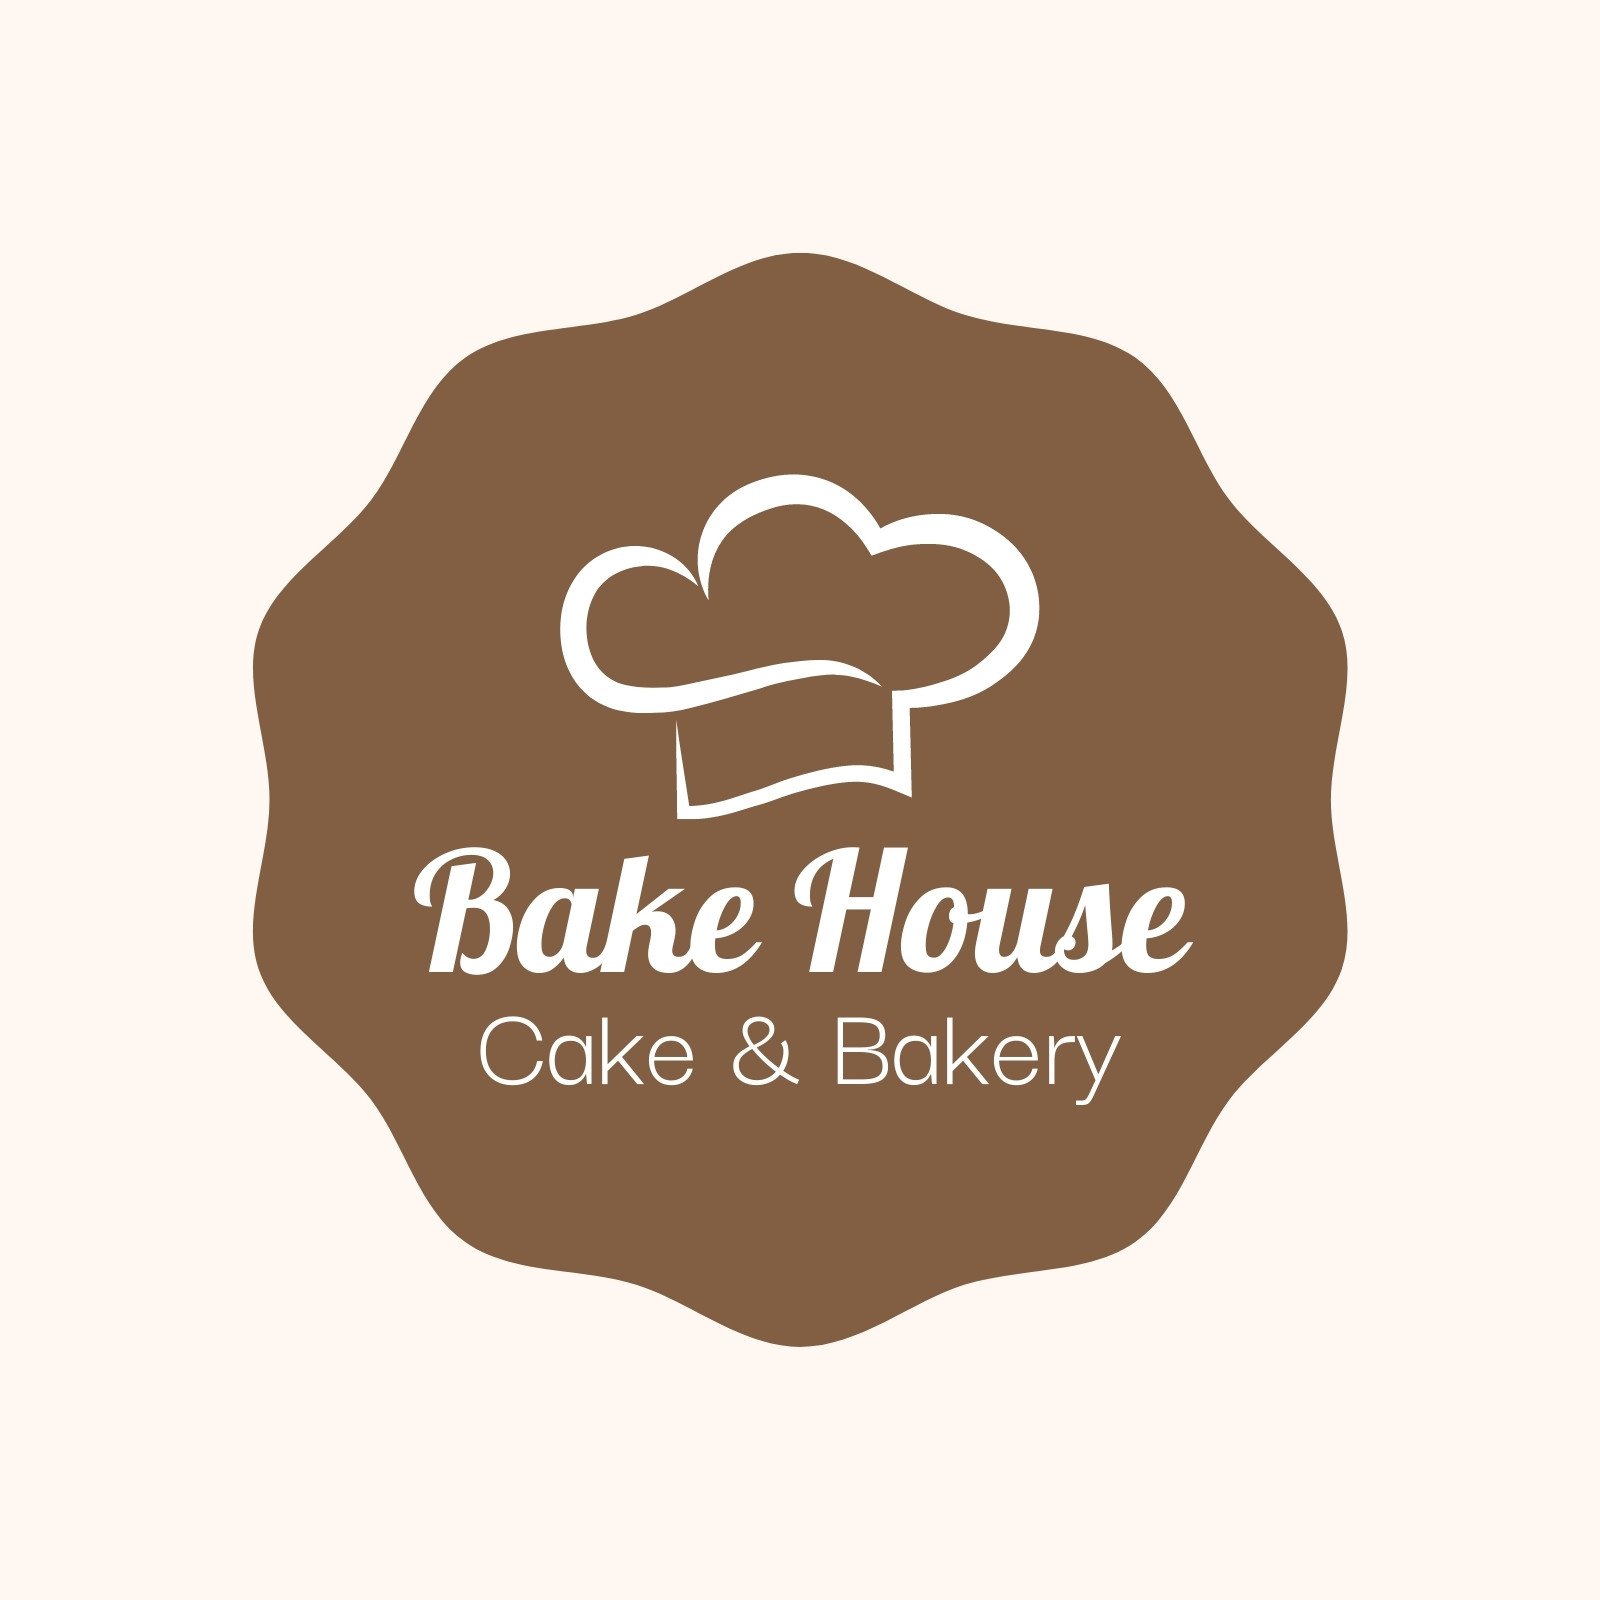 Amateur creating a bakery logo : r/graphic_design